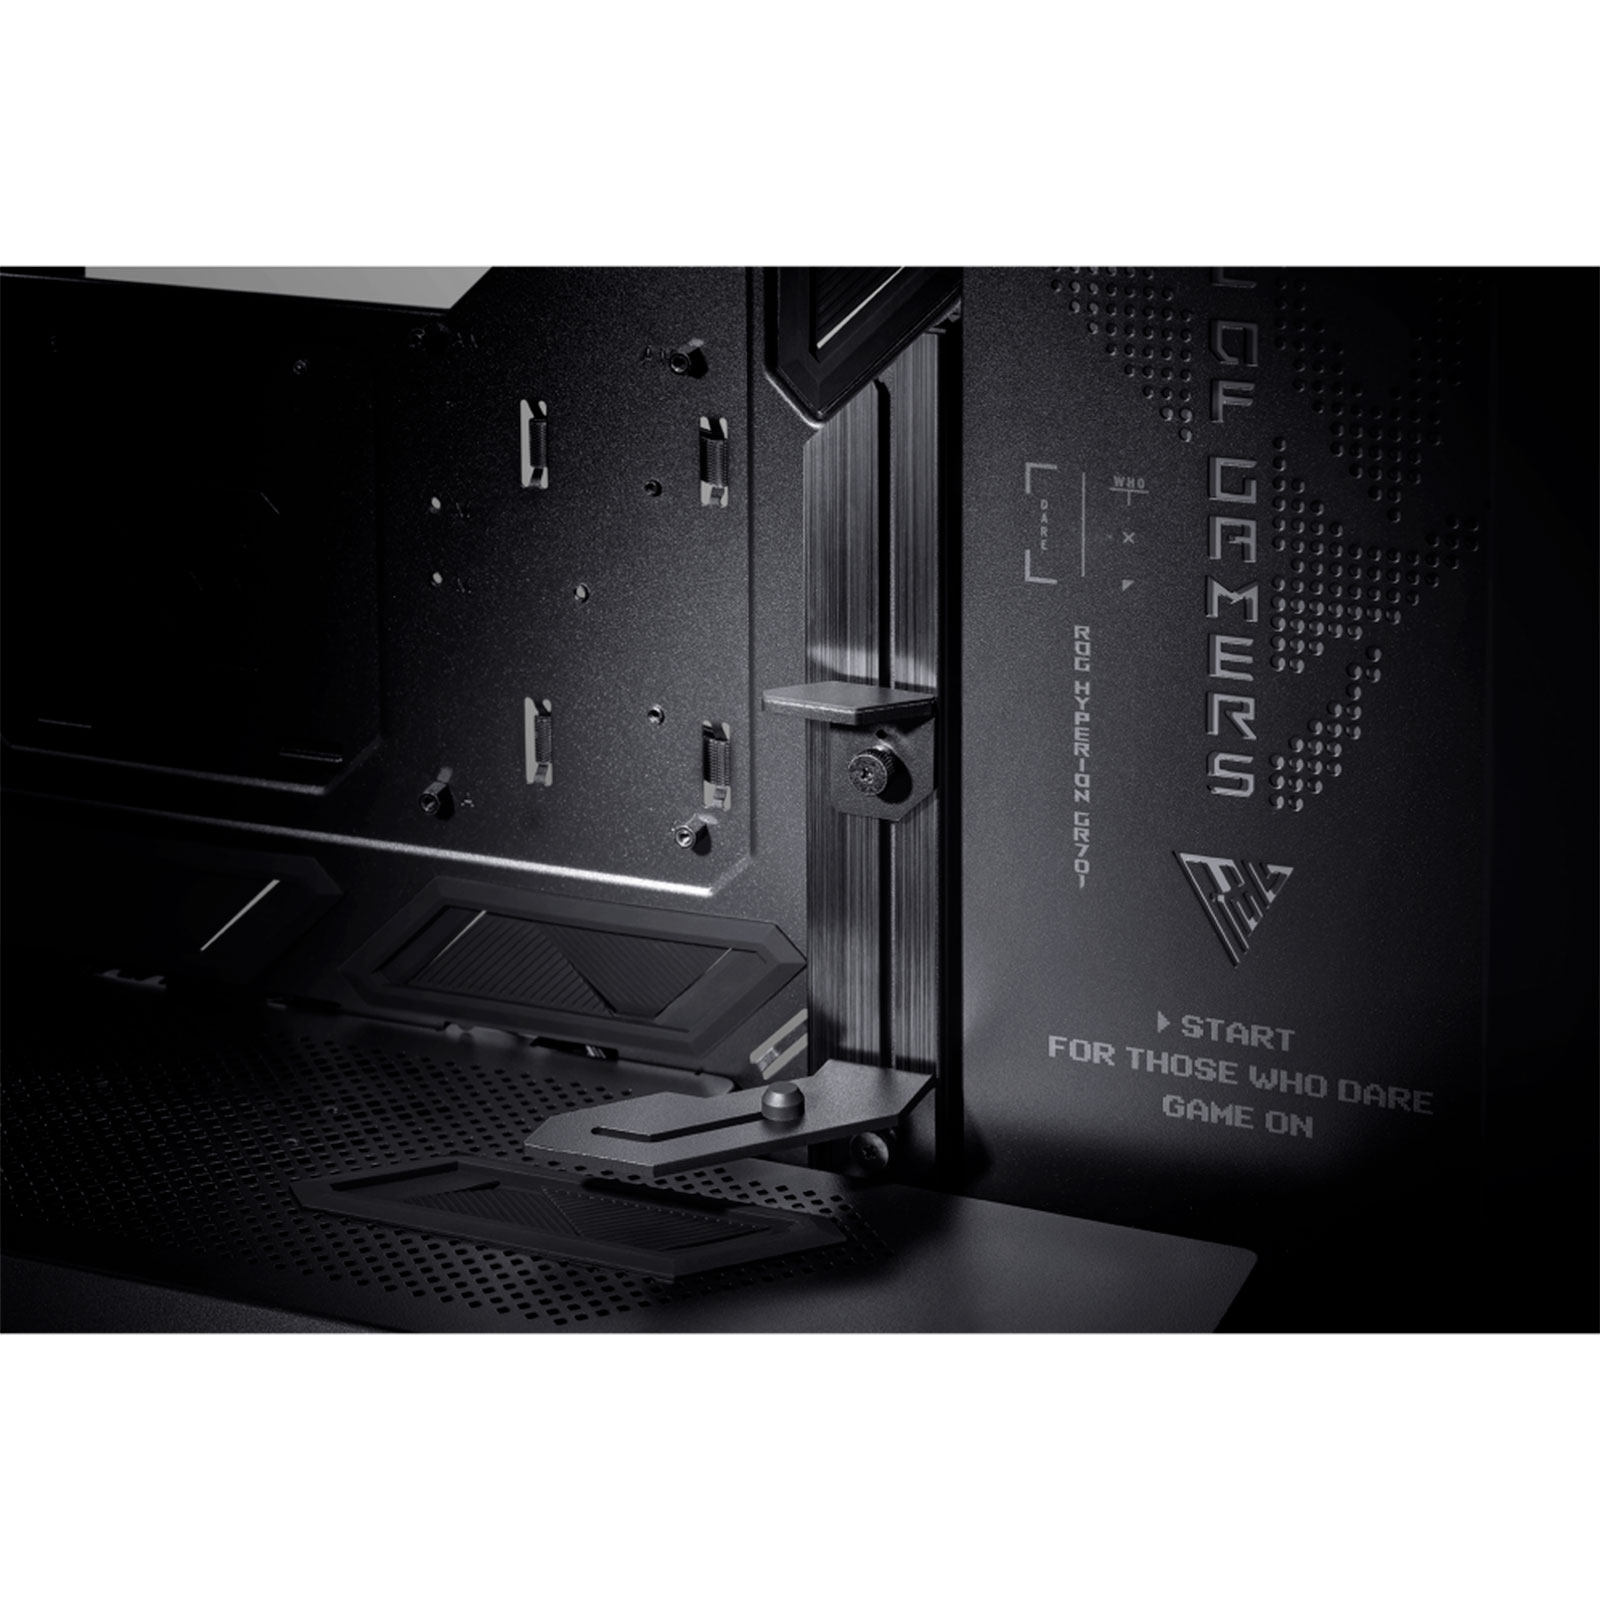 The ASUS ROG Hyperion GR701 chassis looks like it came from the